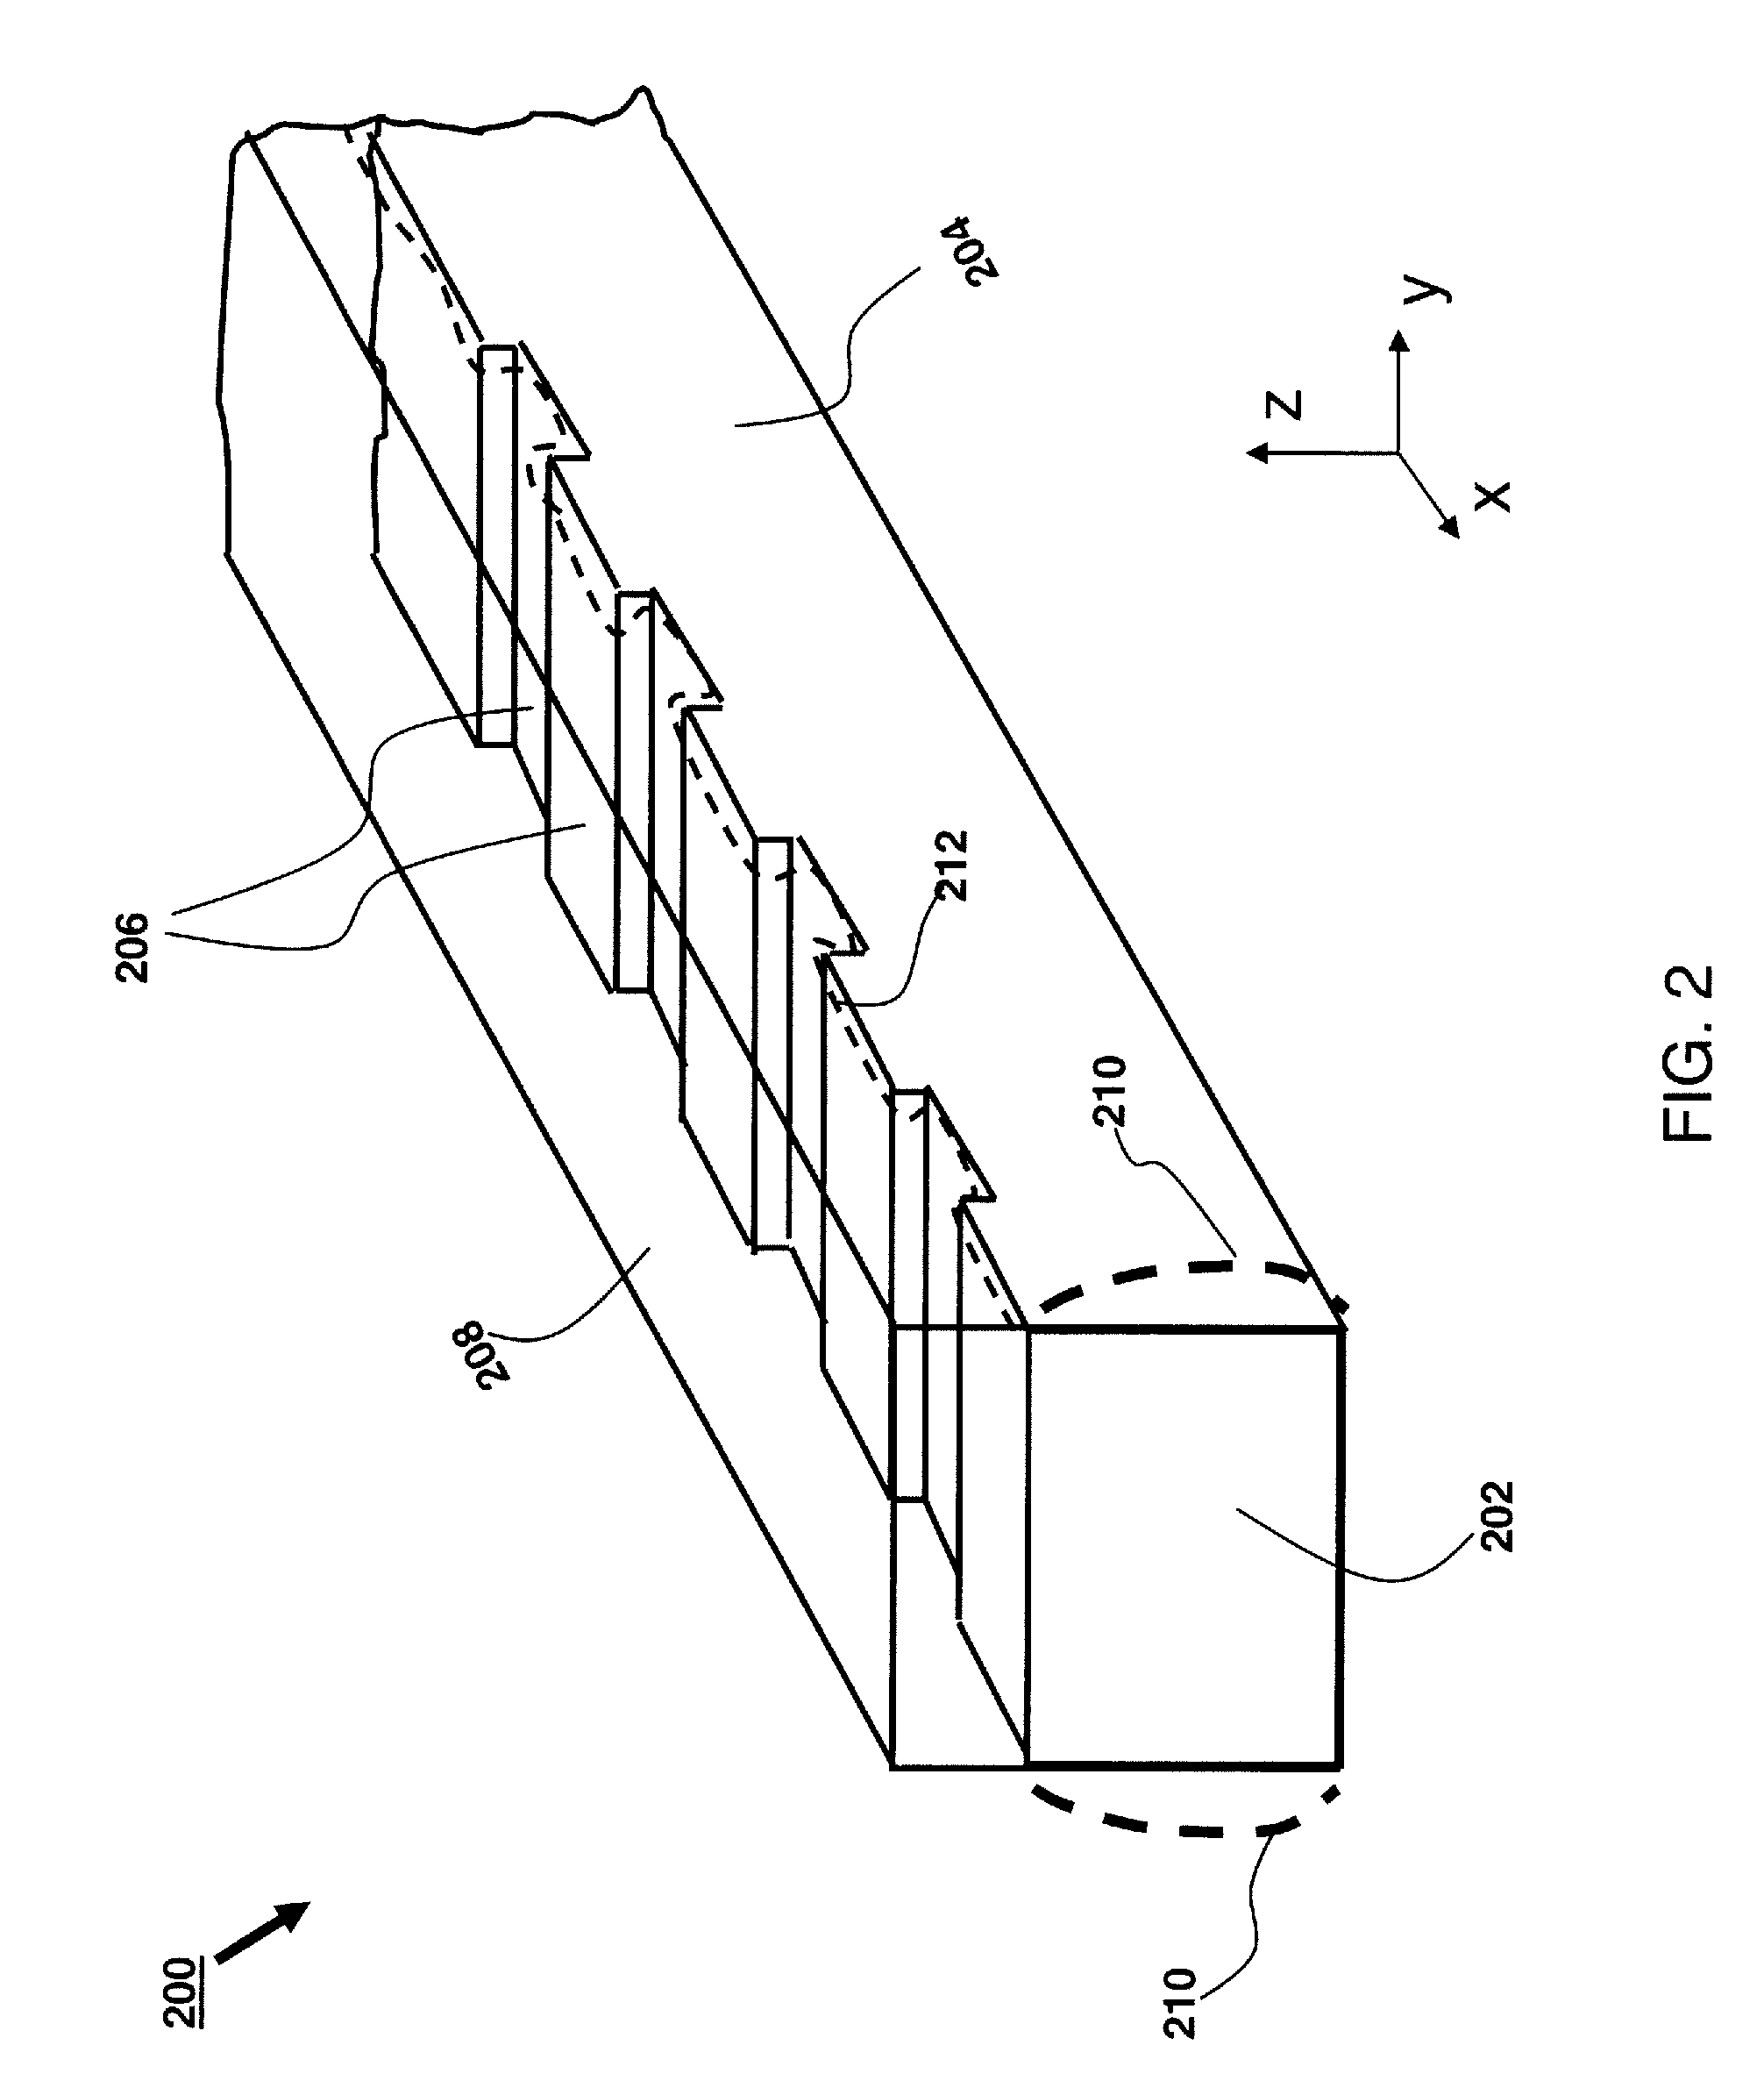 Device fabrication with planar bragg gratings suppressing parasitic effects